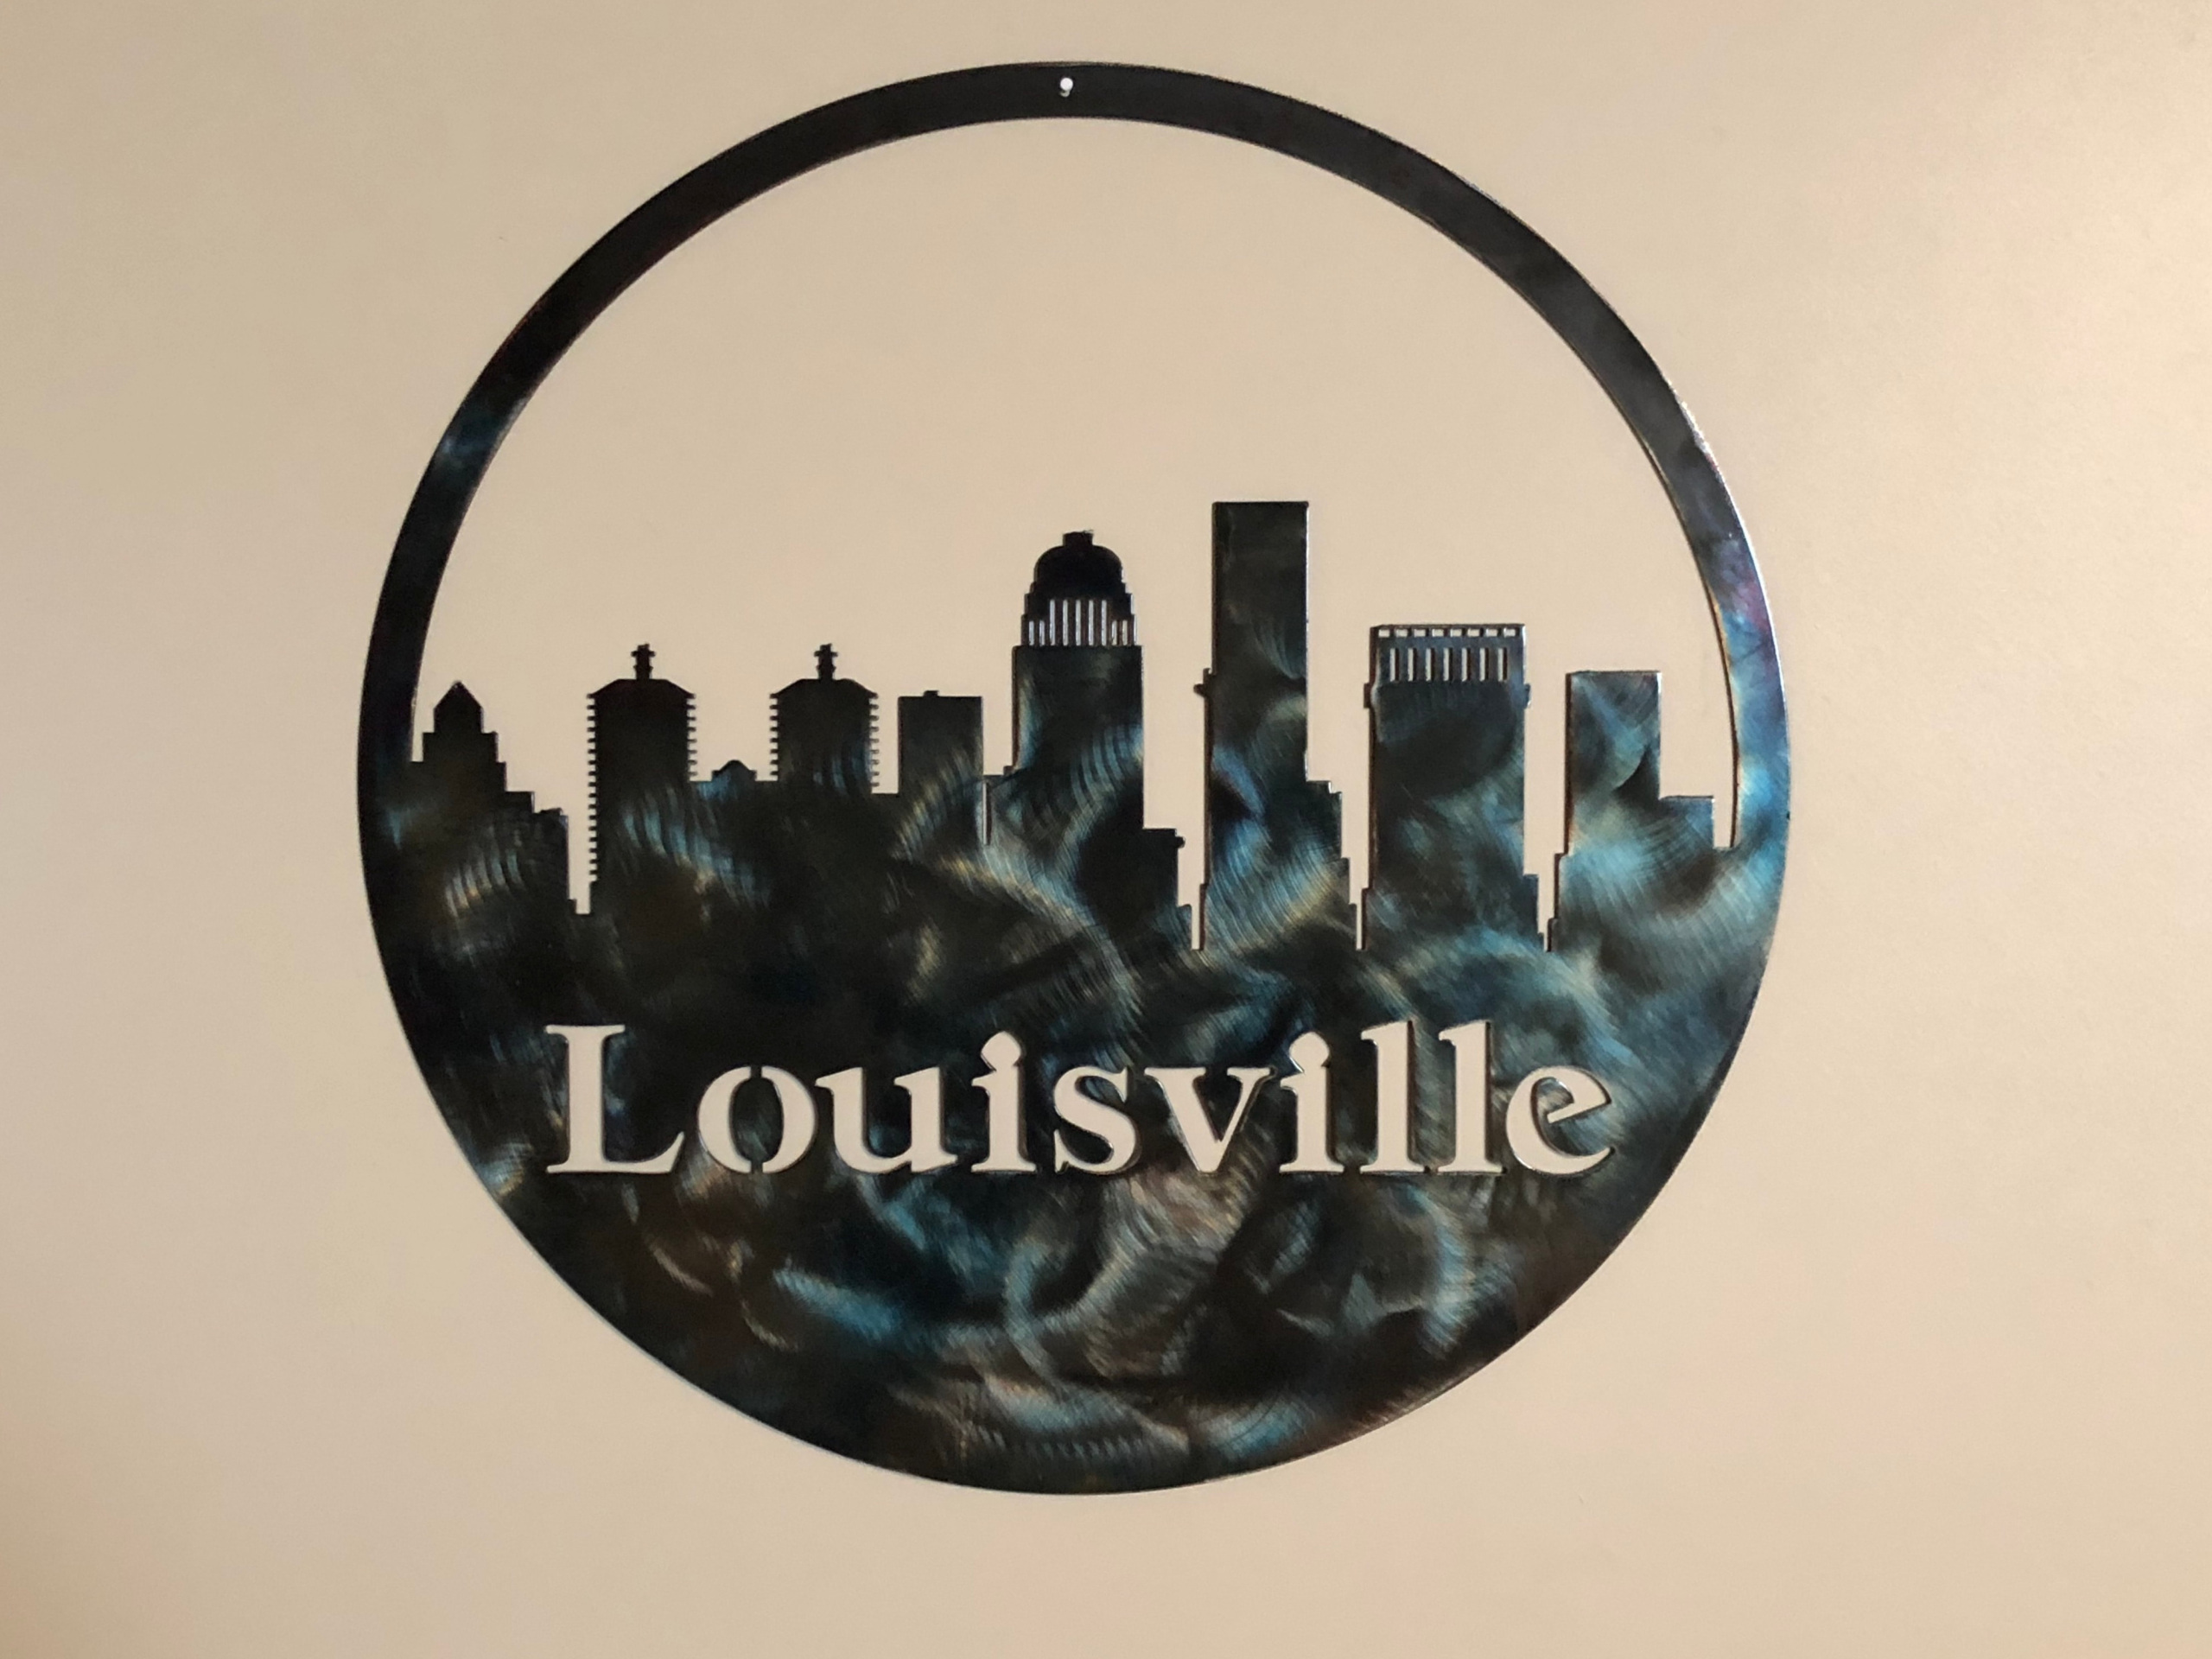 Colorful Louisville skyline design Art Print by DimoDesigns